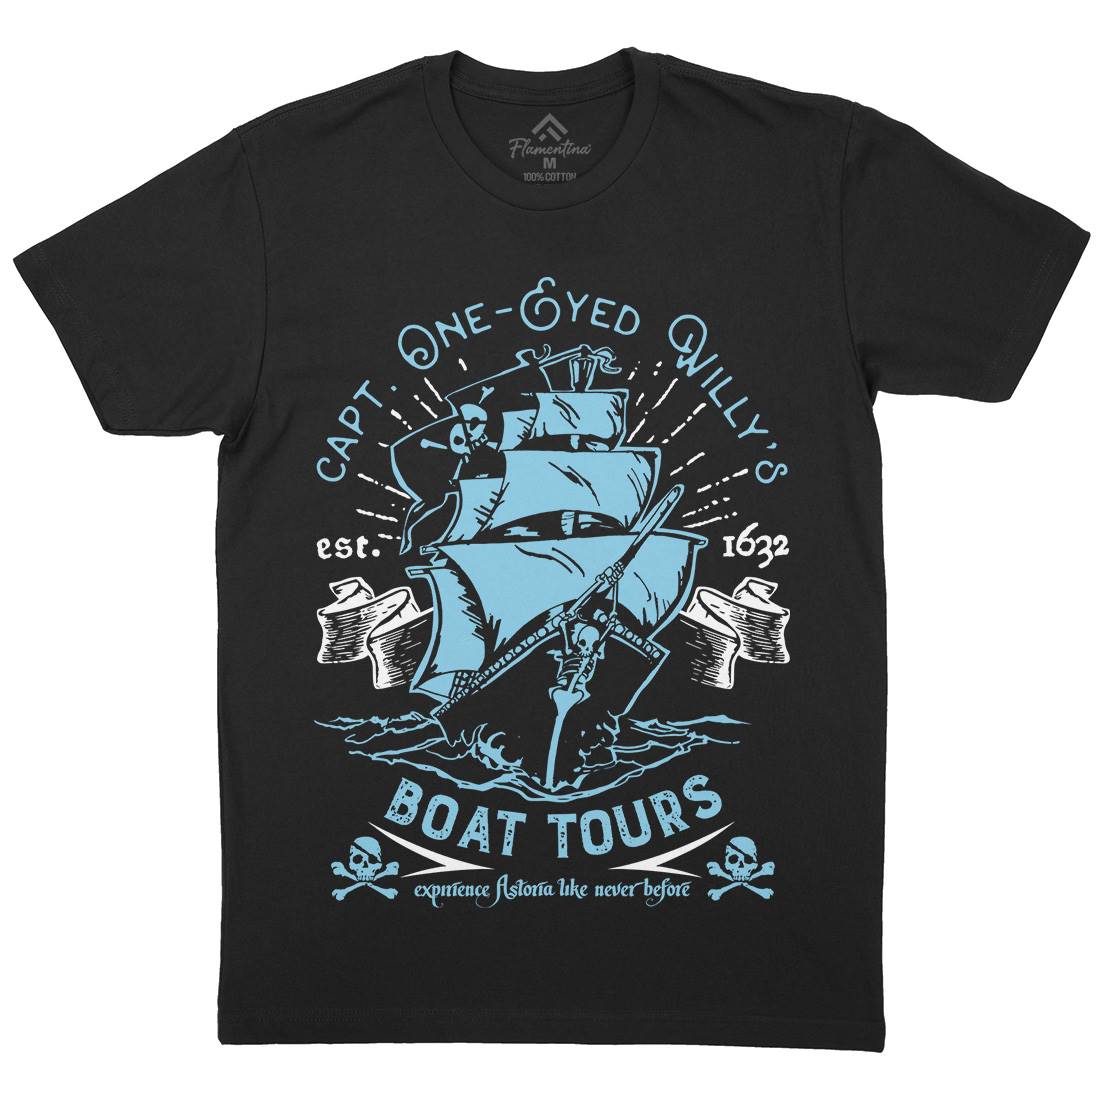 One-Eyed Willys Boat Tours Mens Crew Neck T-Shirt Horror D160